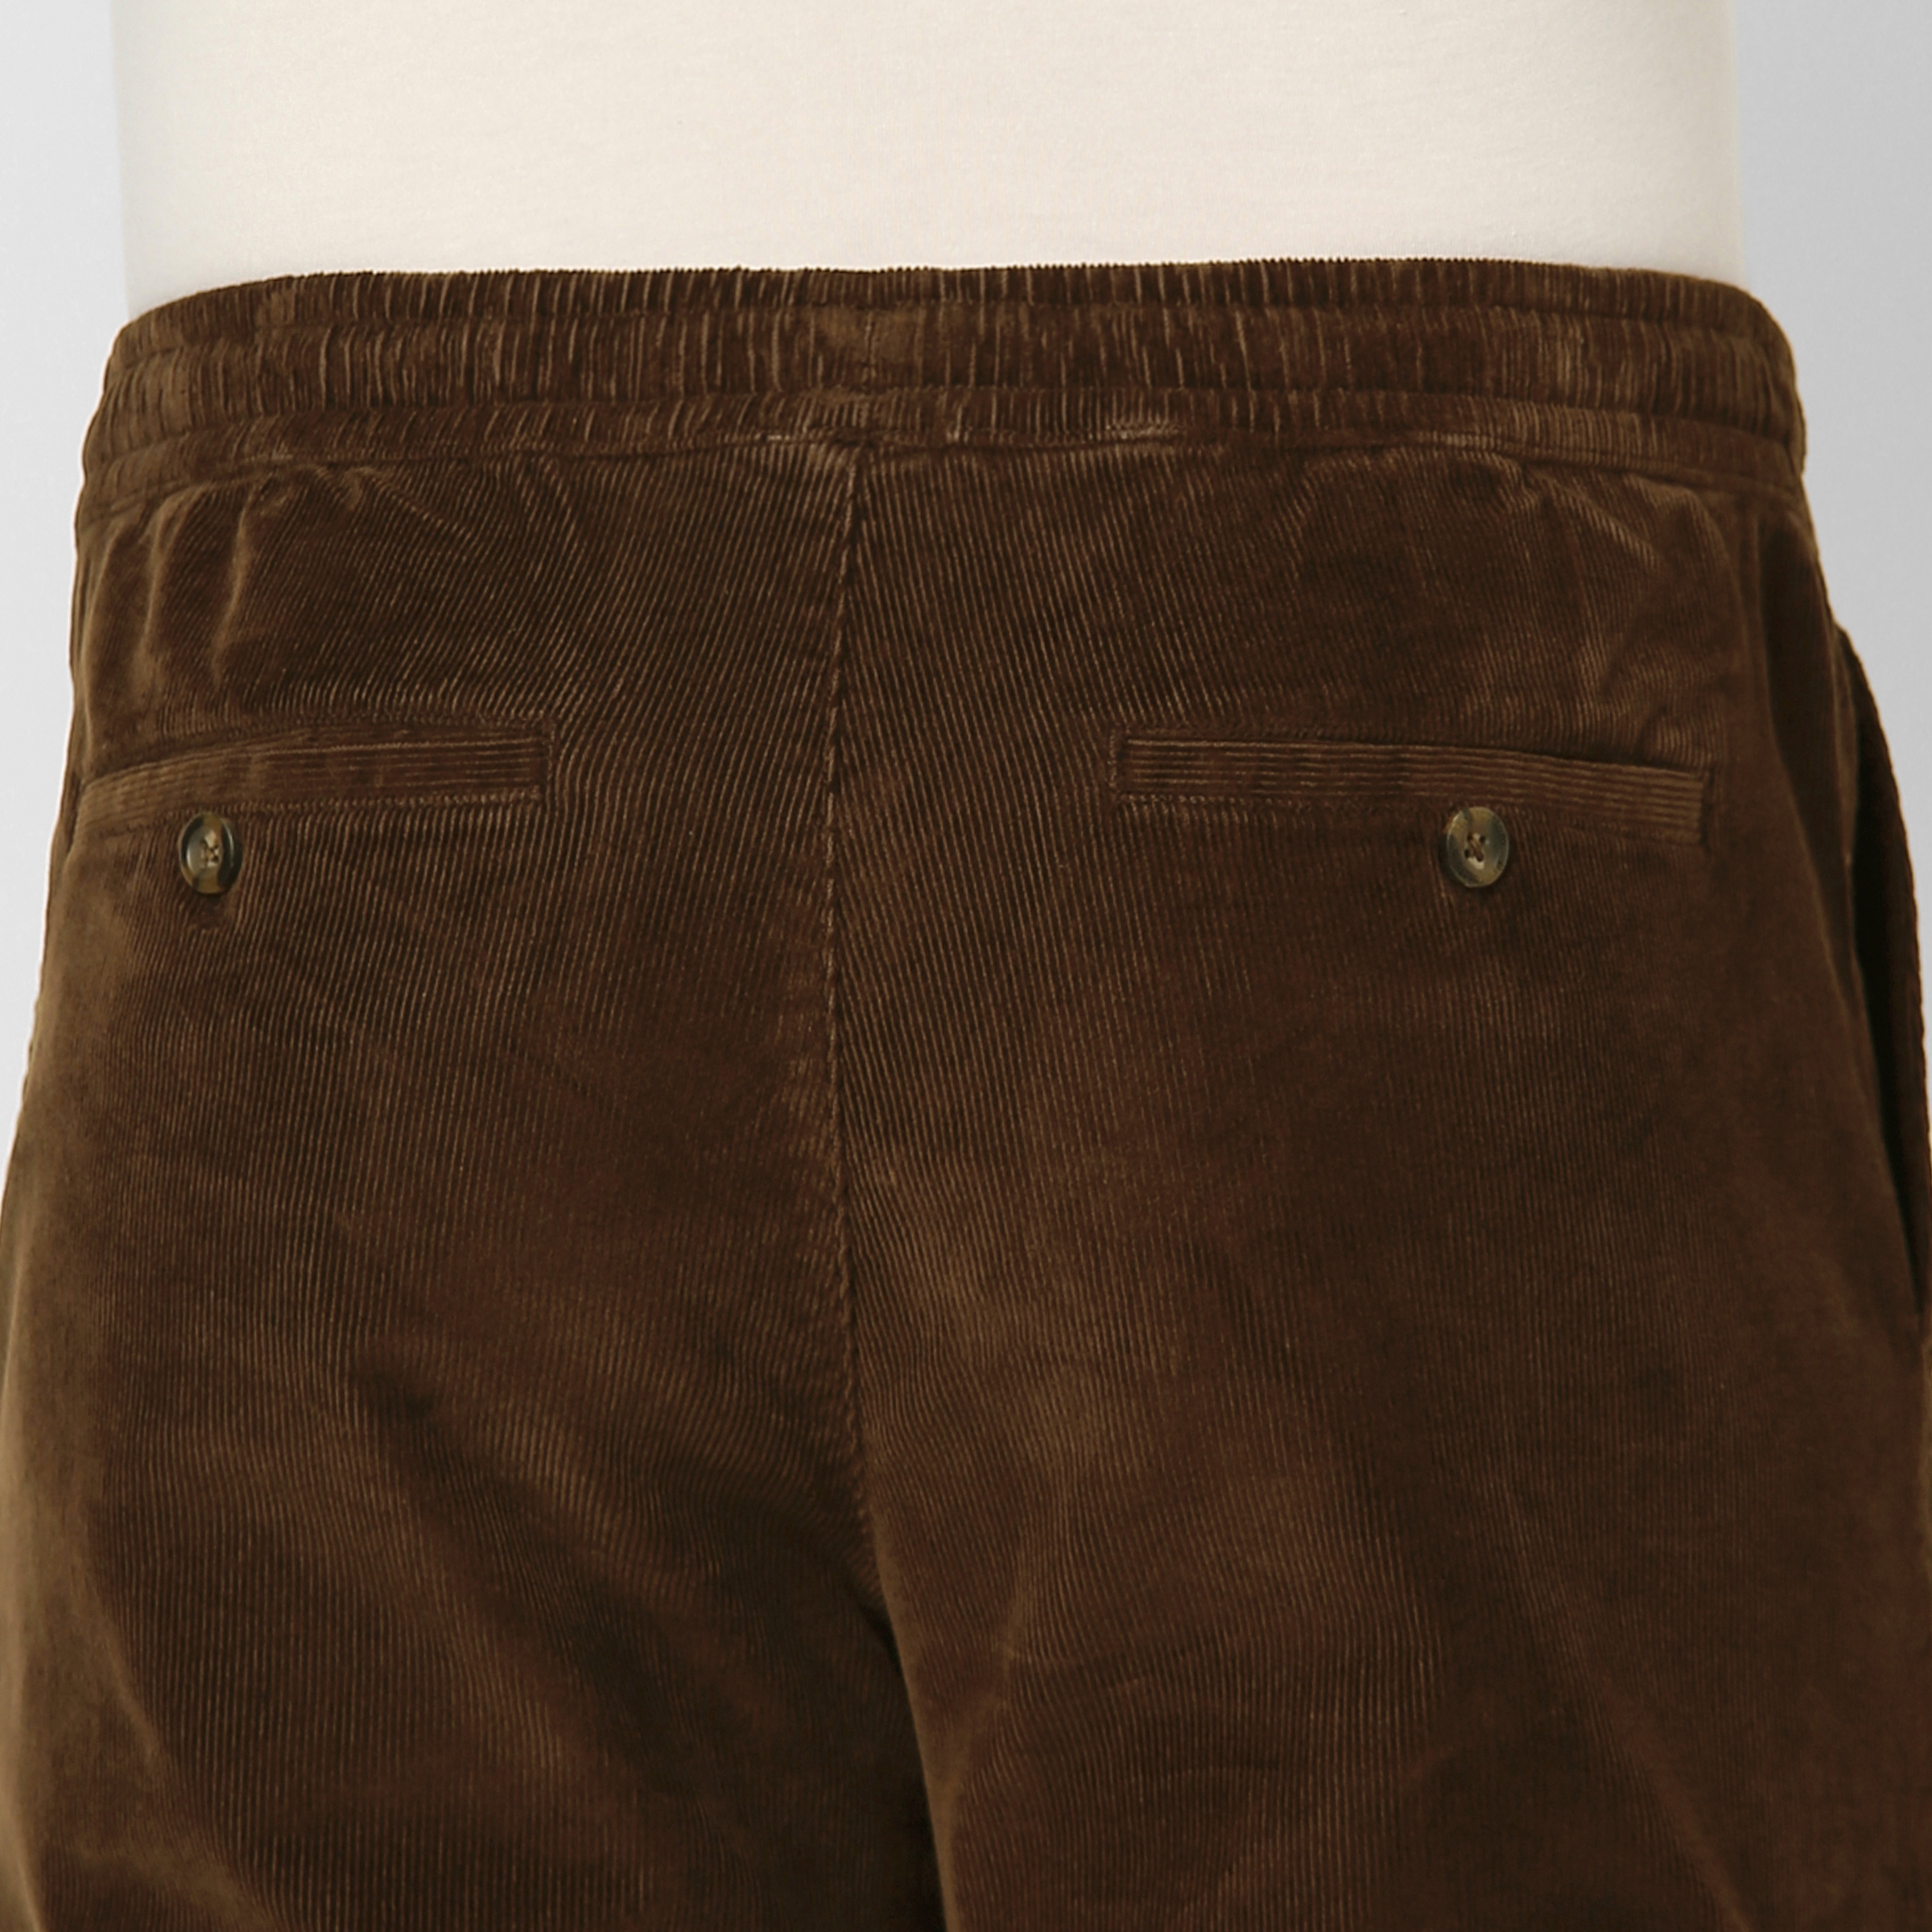 Corduroy Easy Pant Cocoa close up back button pockets on model